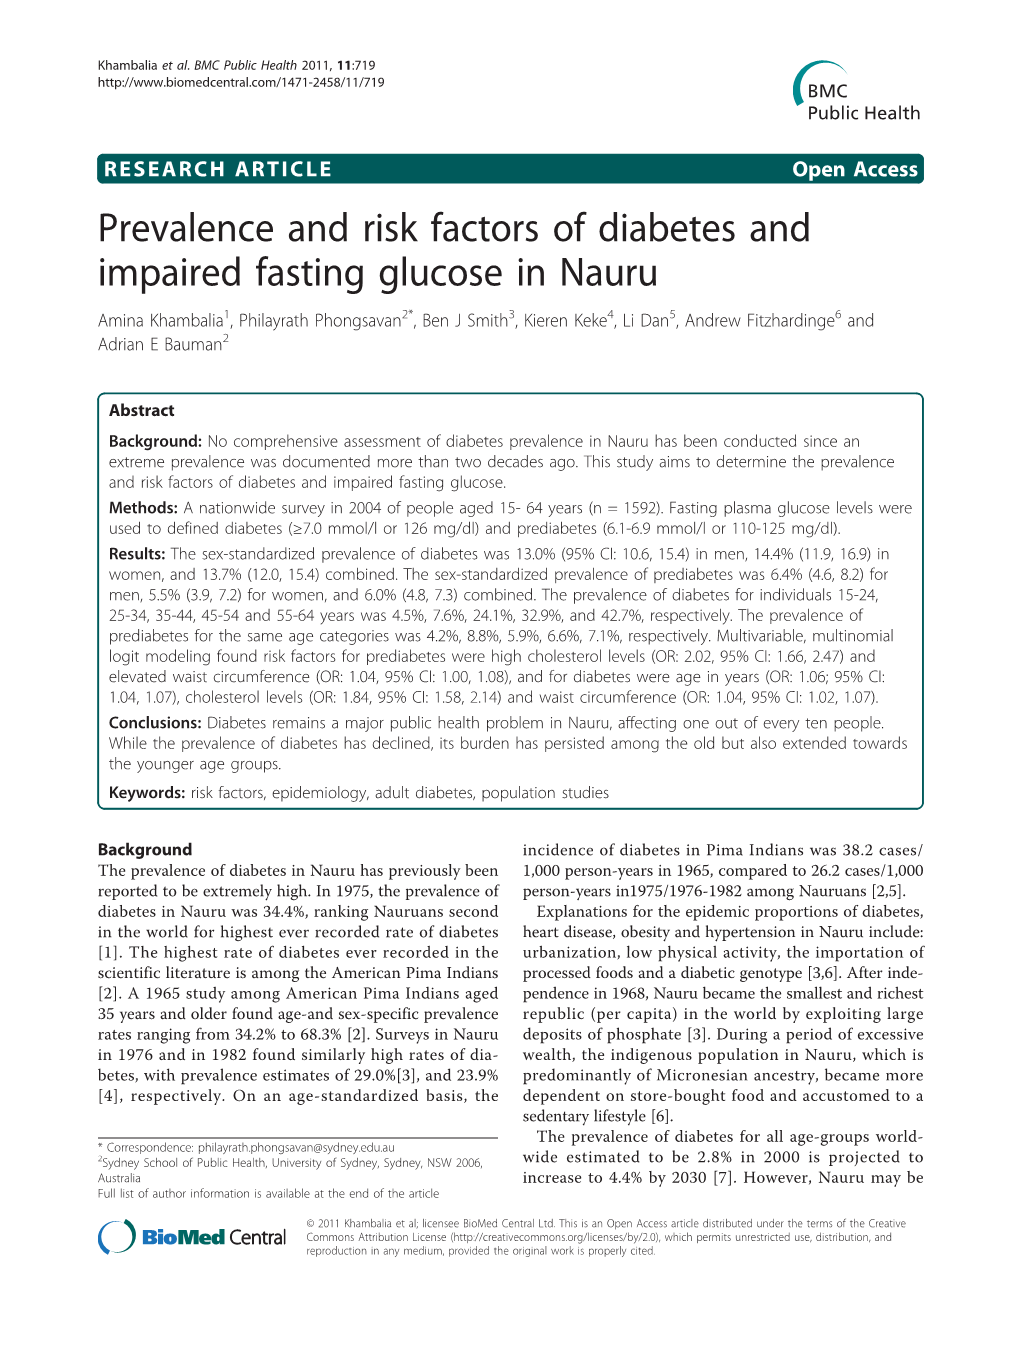 Prevalence and Risk Factors of Diabetes and Impaired Fasting